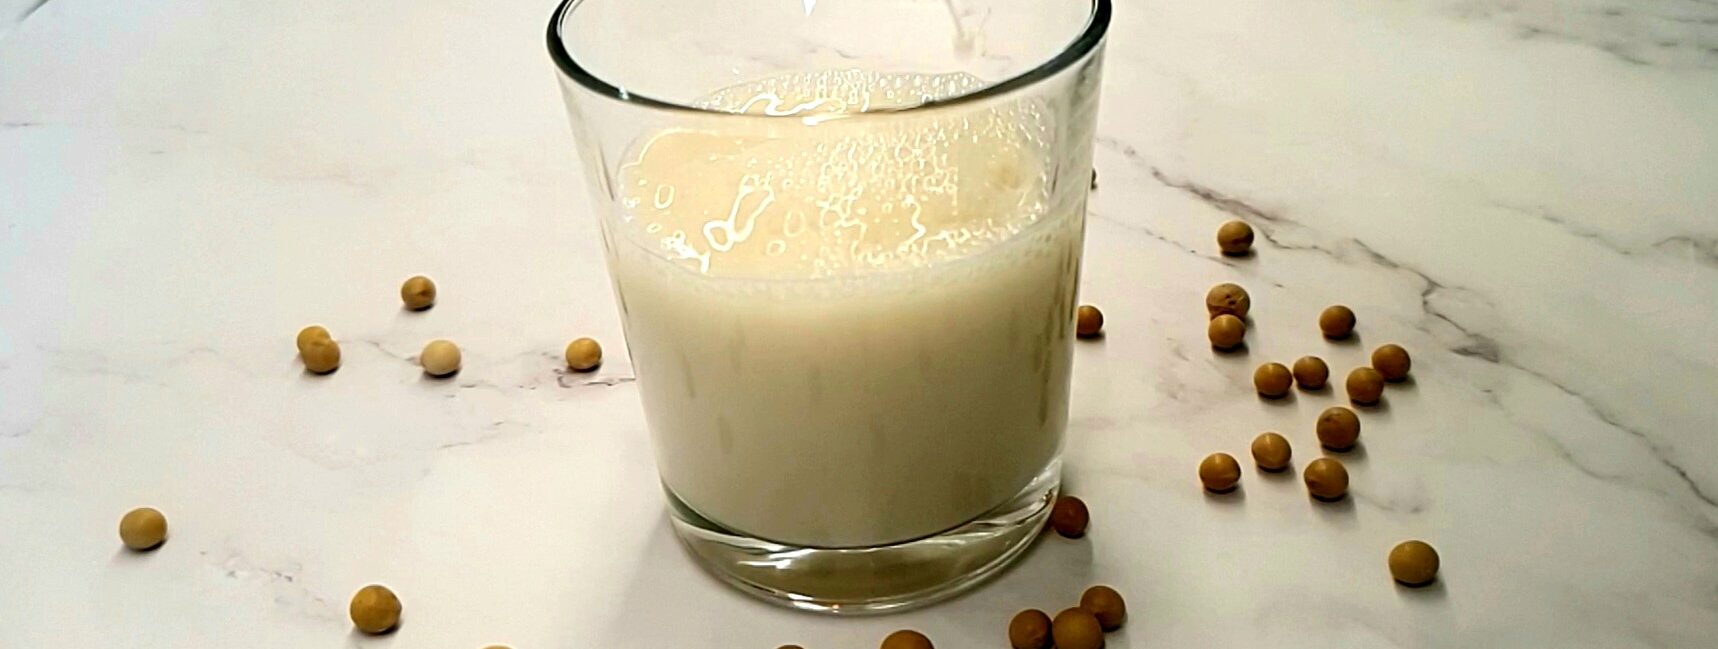 Soy milk being poured into a glass.